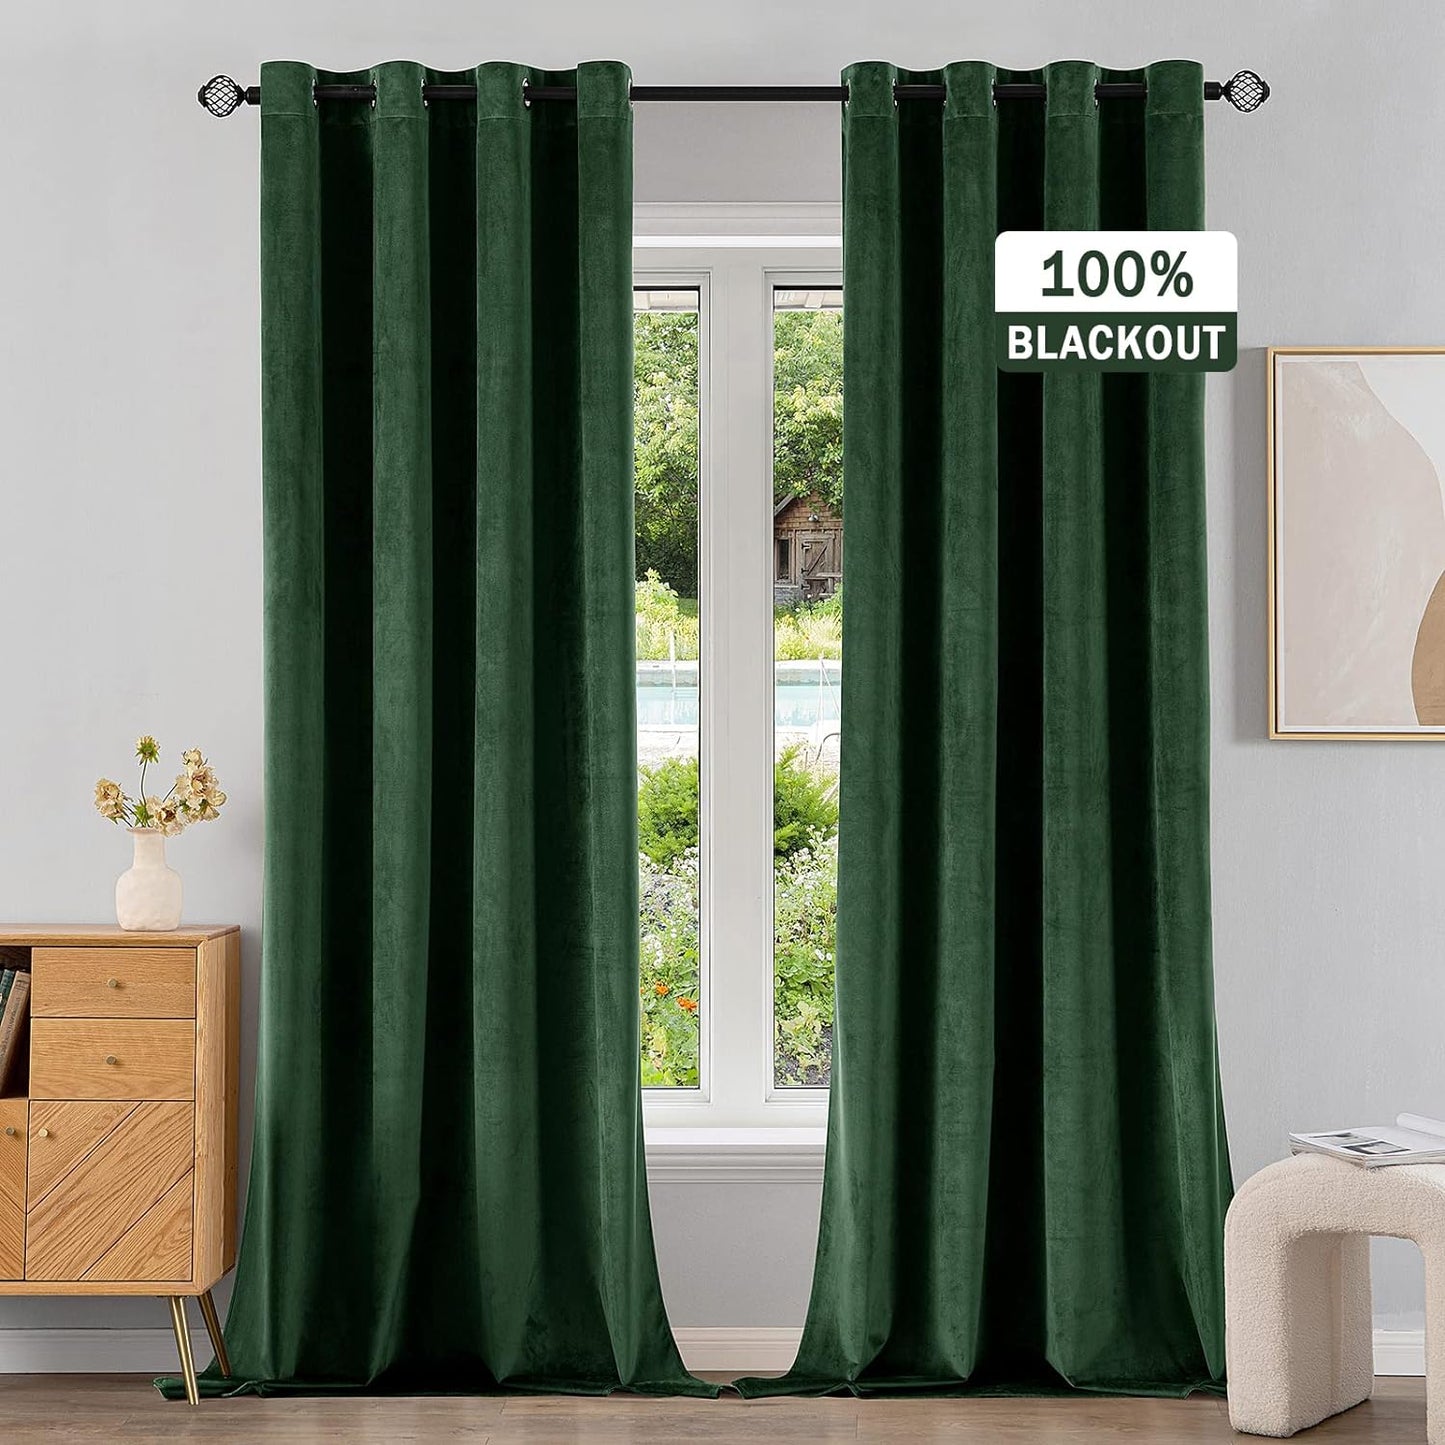 EMEMA Olive Green Velvet Curtains 84 Inch Length 2 Panels Set, Room Darkening Luxury Curtains, Grommet Thermal Insulated Drapes, Window Curtains for Living Room, W52 X L84, Olive Green  EMEMA 100 Blackout/ Dark Green W52" X L96" 